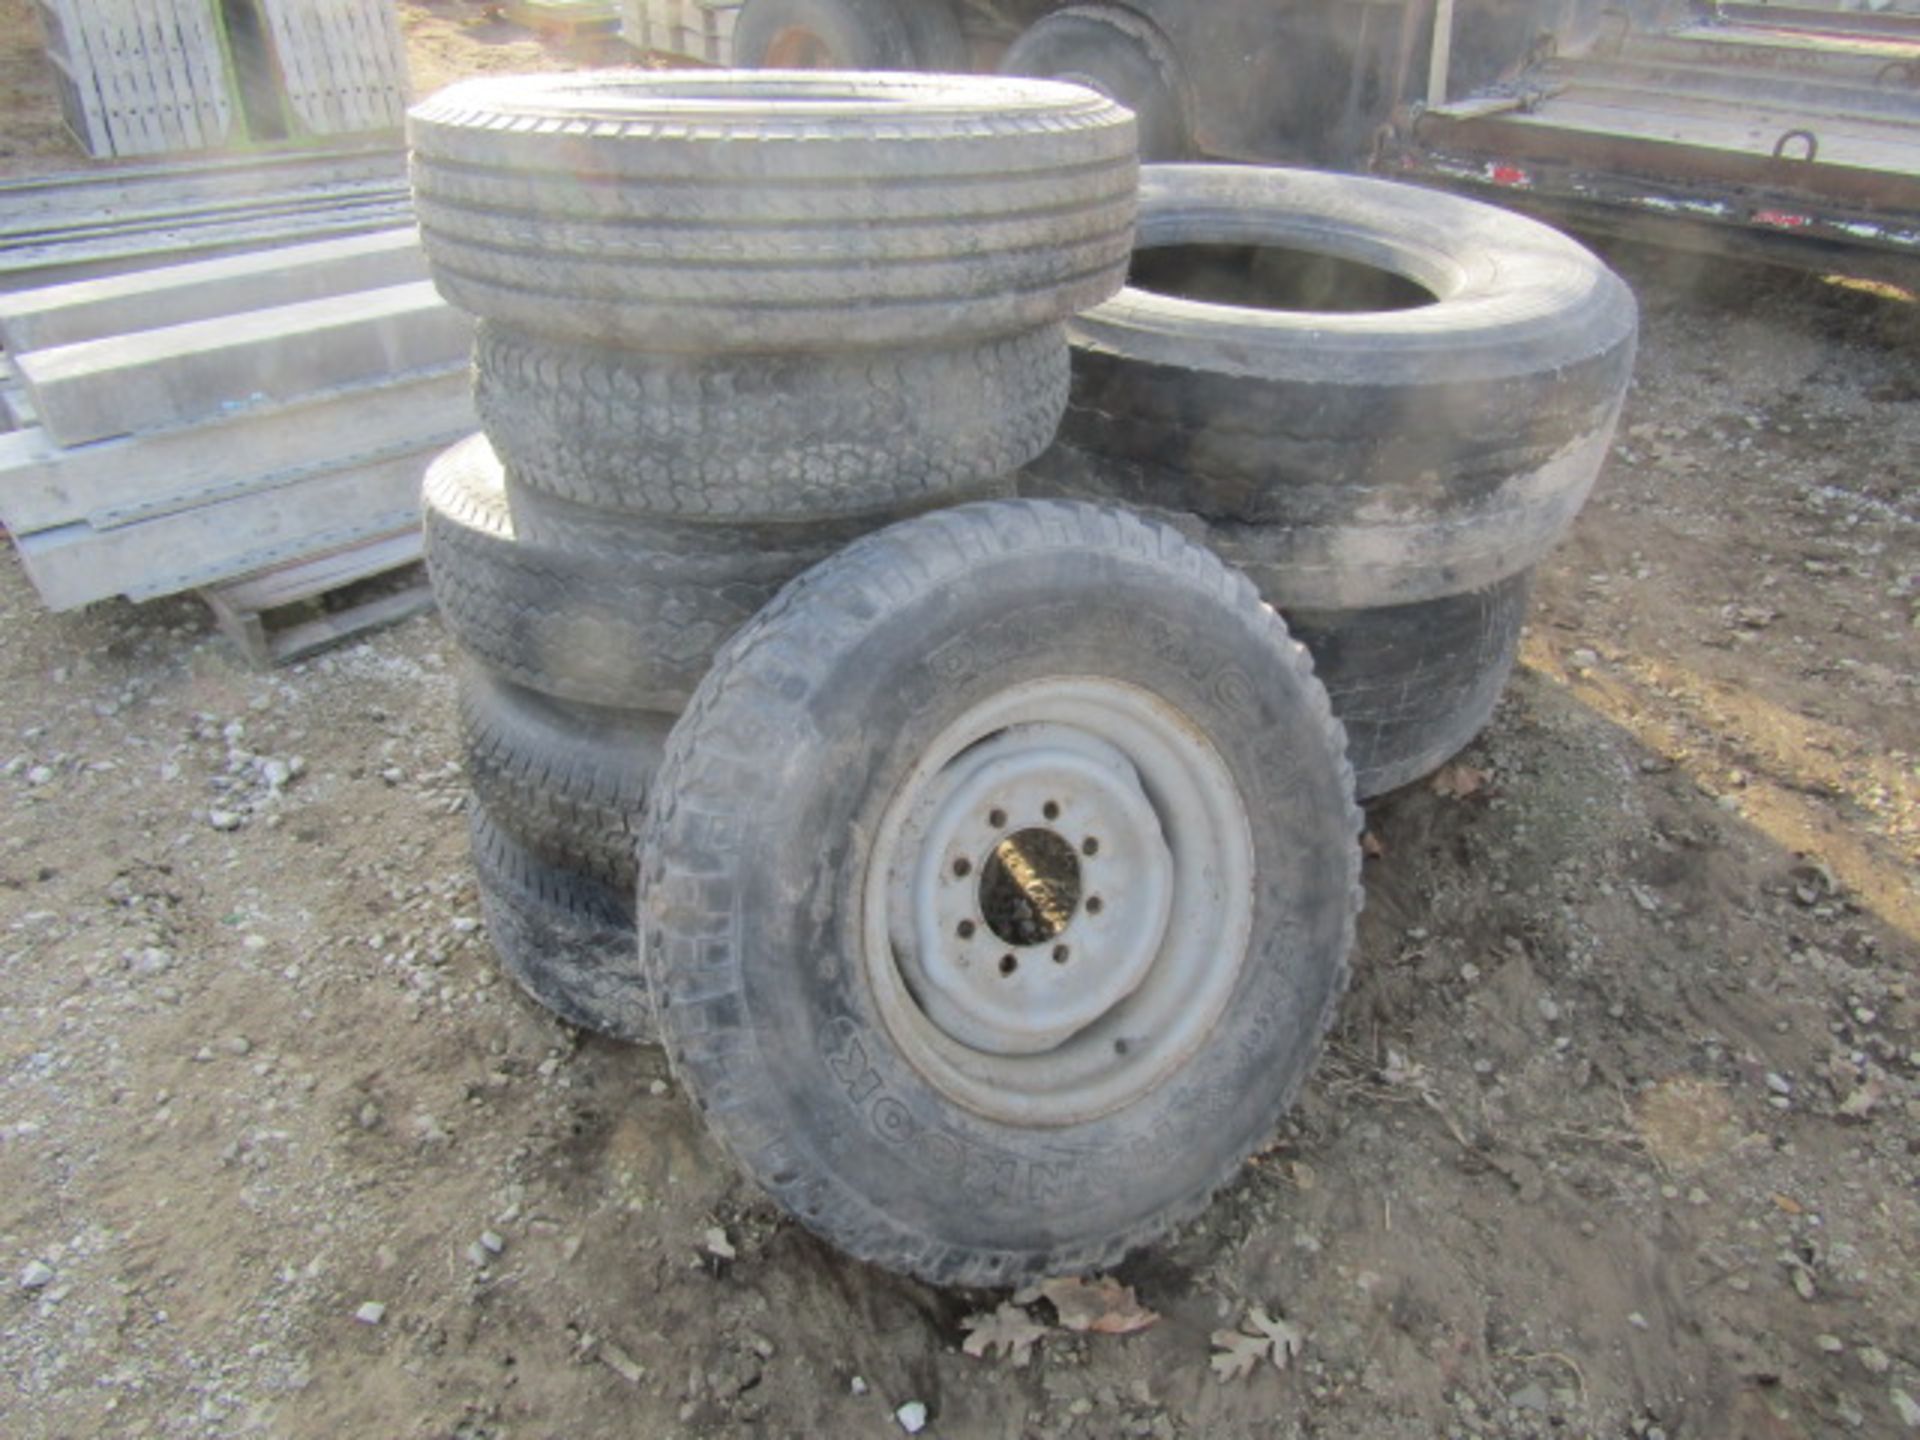 Pallet of Used Tires & Rims, Located in Winterset, IA